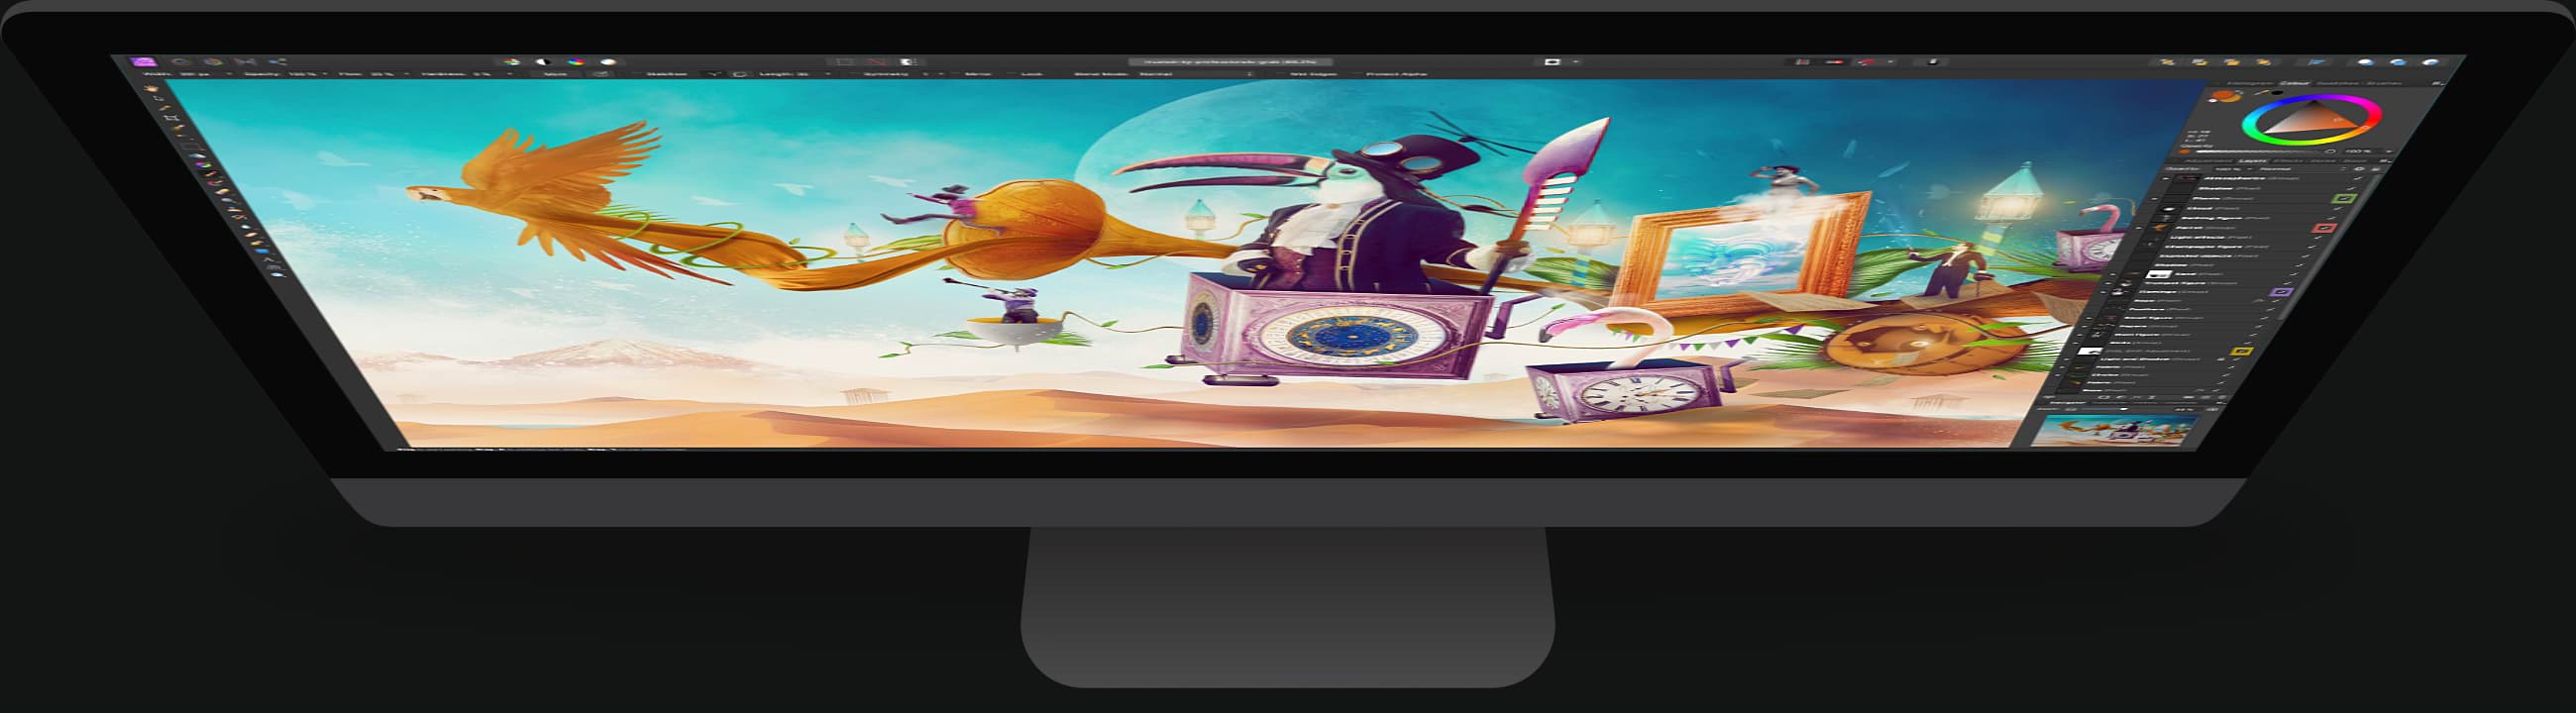 Desktop computer with Affinity Photo open, featuring surreal composition of toucan and other animals travelling across desert